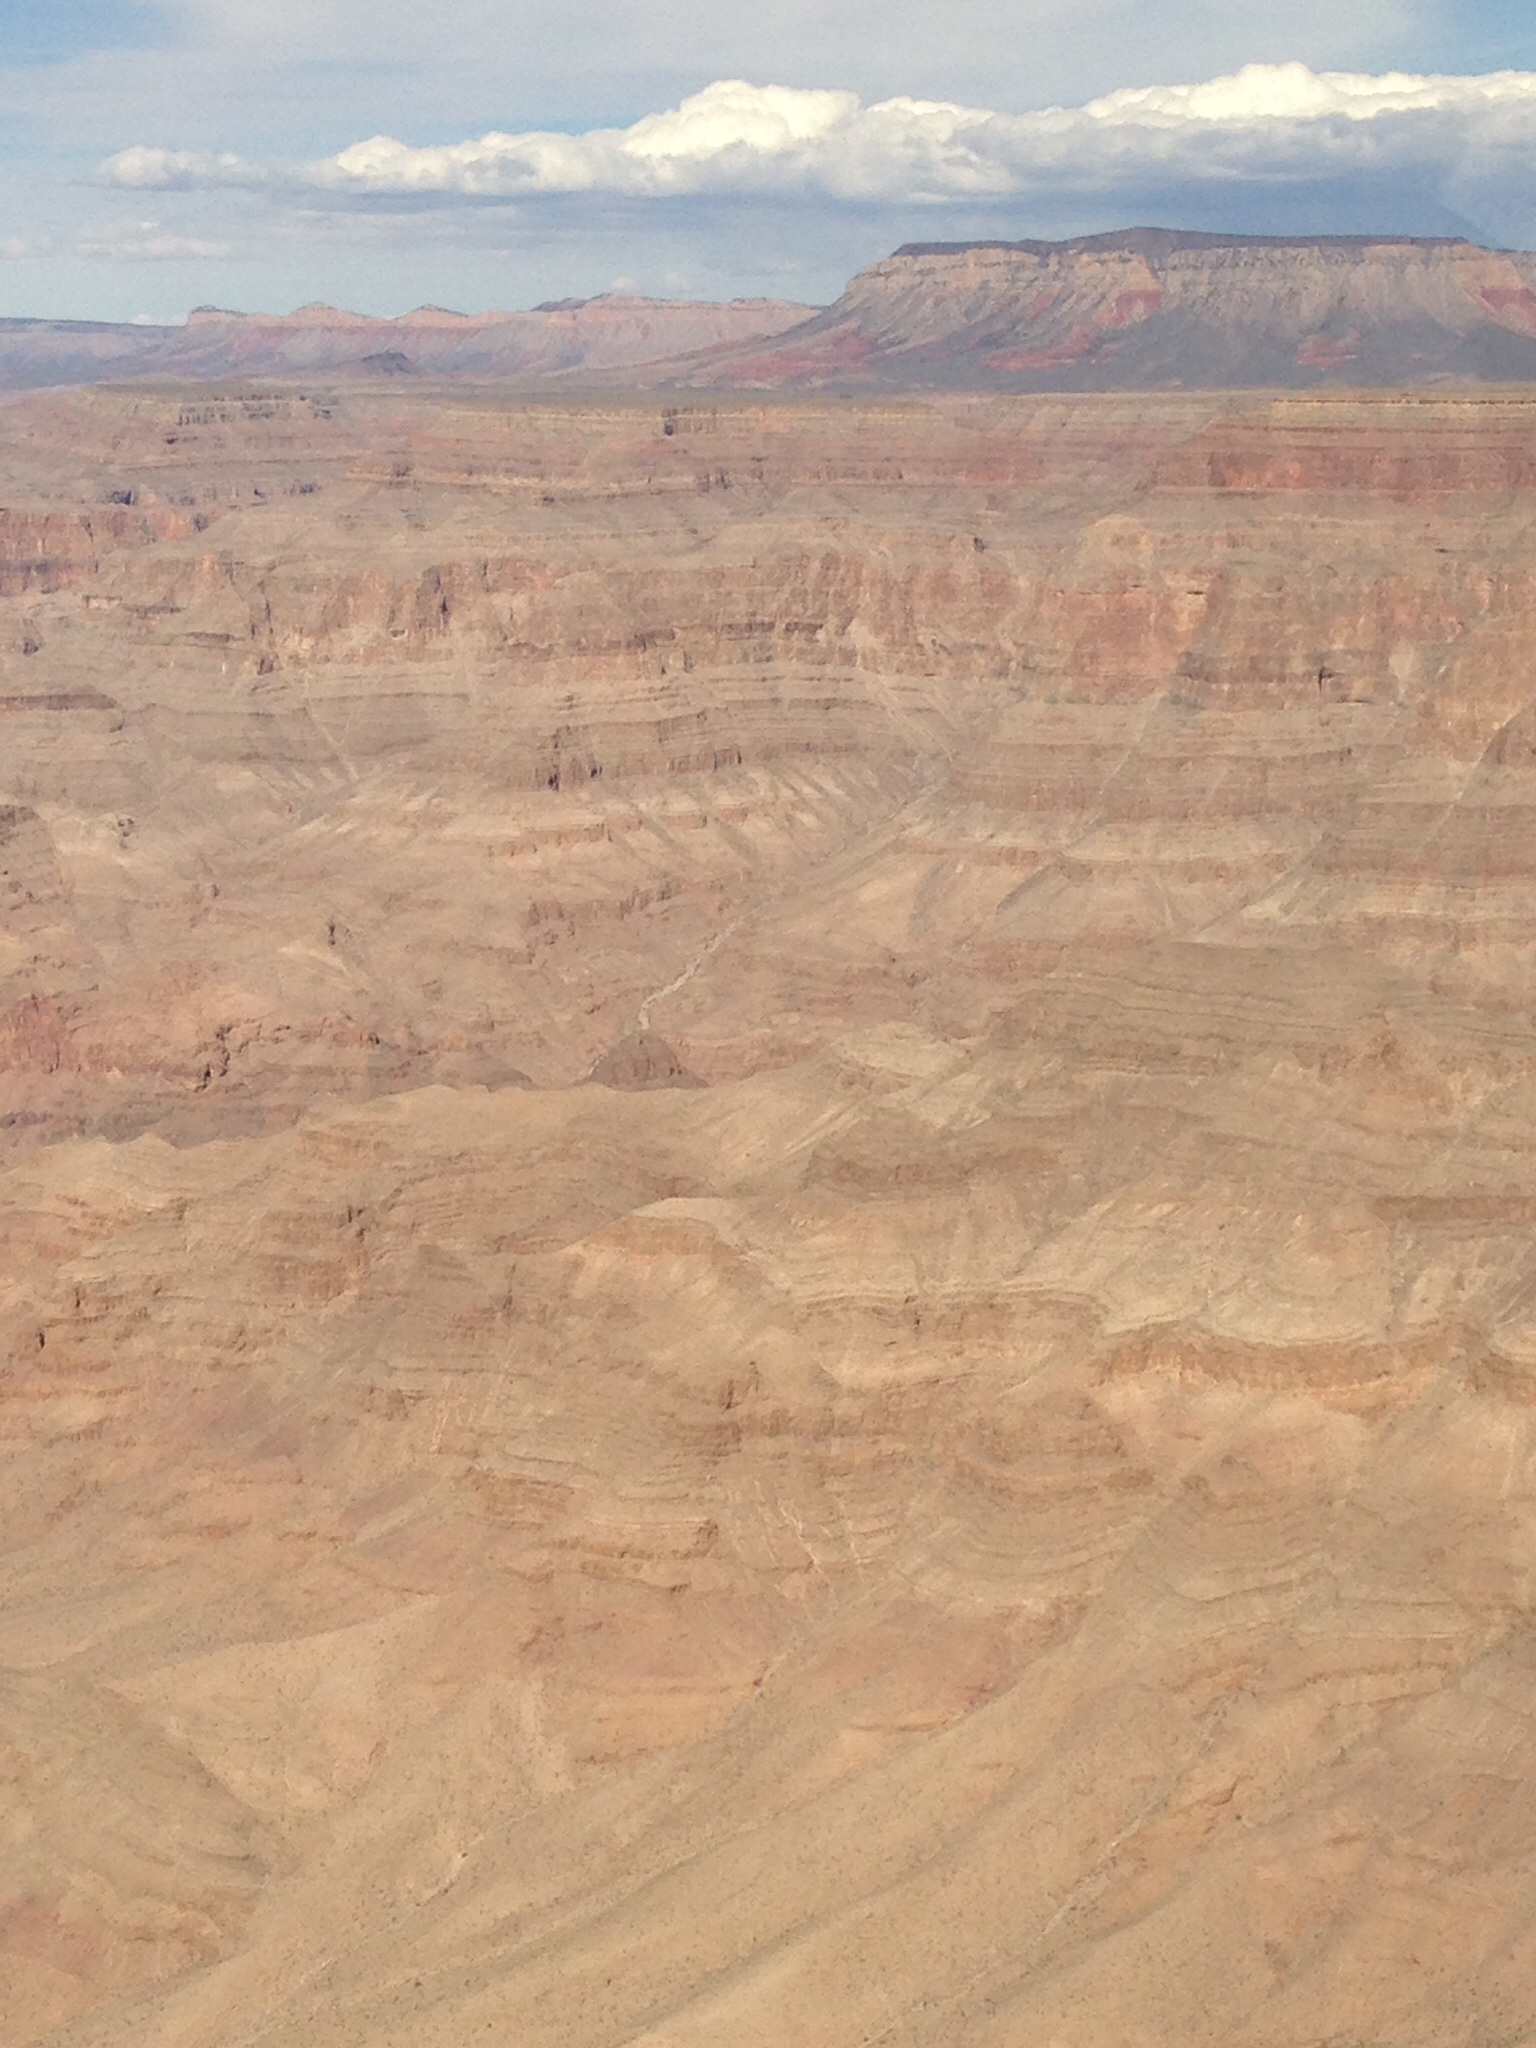 Grand Canyon helicopter flight